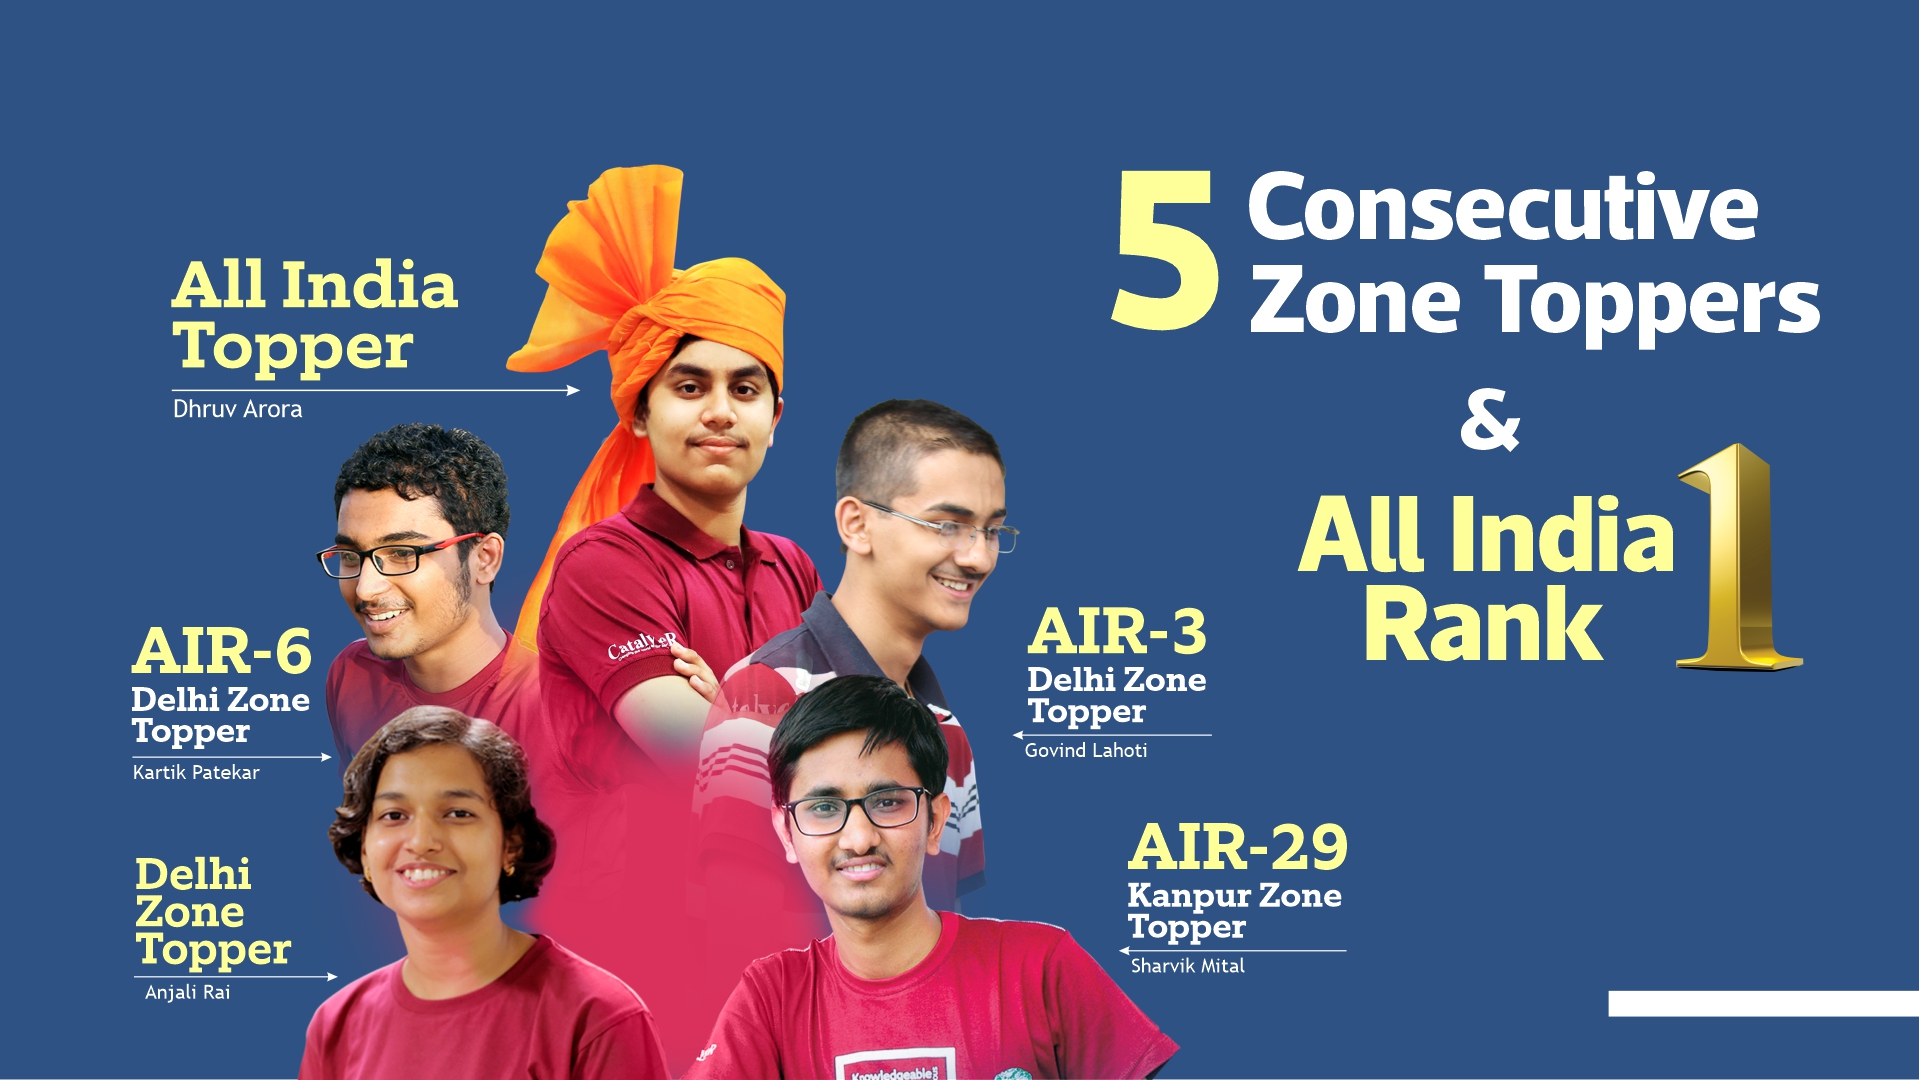 5 Consecutive Zone Toppers